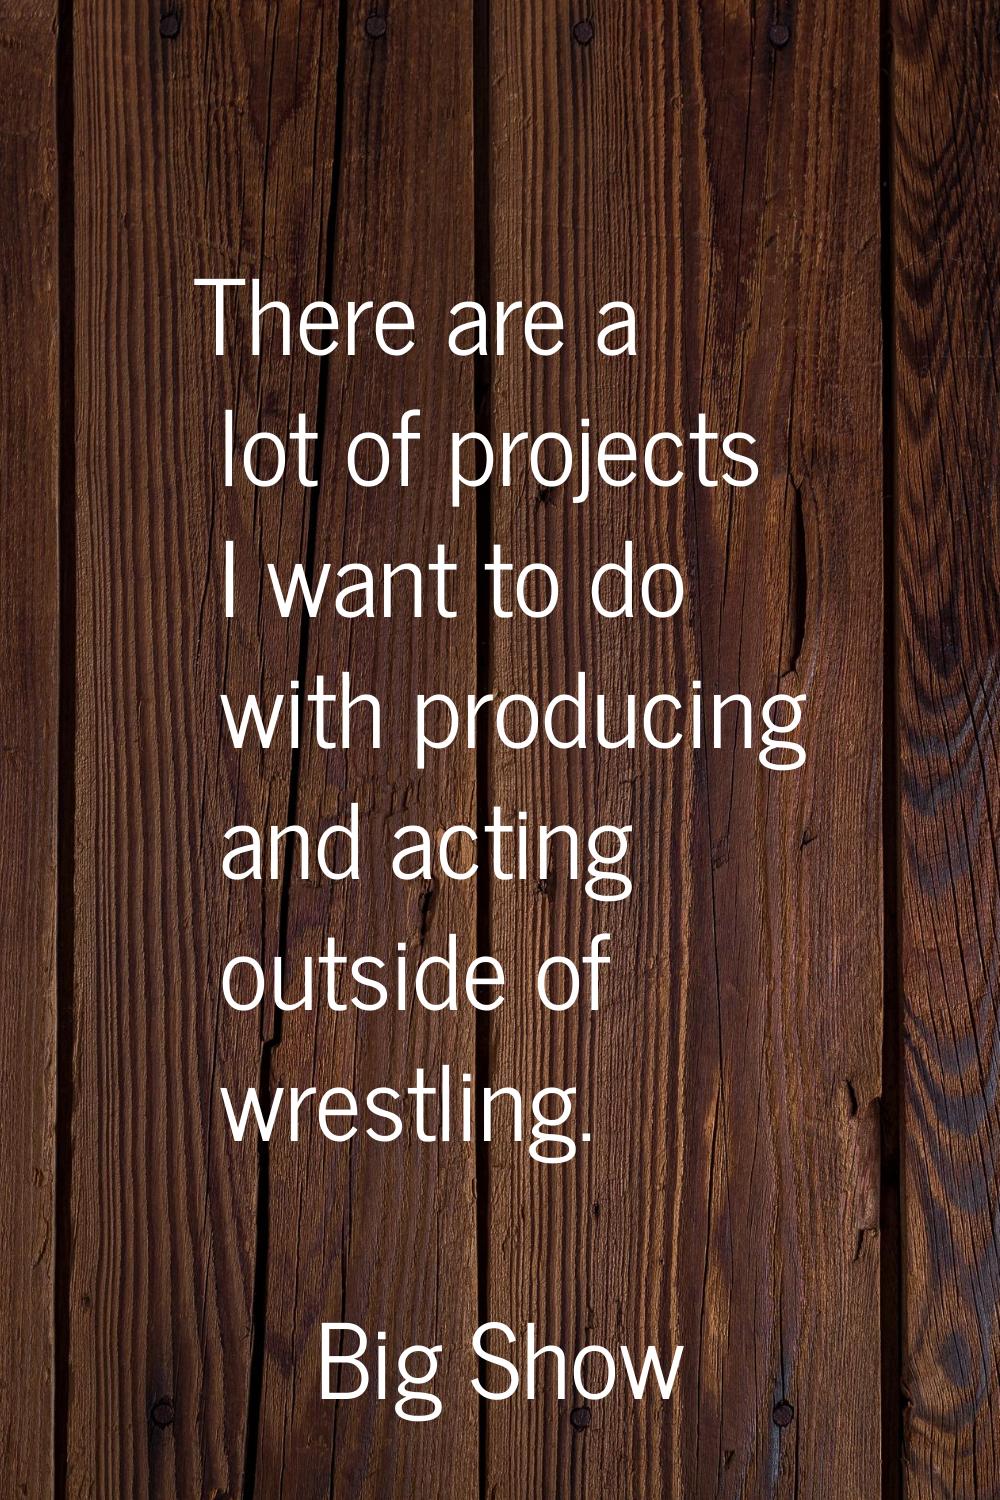 There are a lot of projects I want to do with producing and acting outside of wrestling.